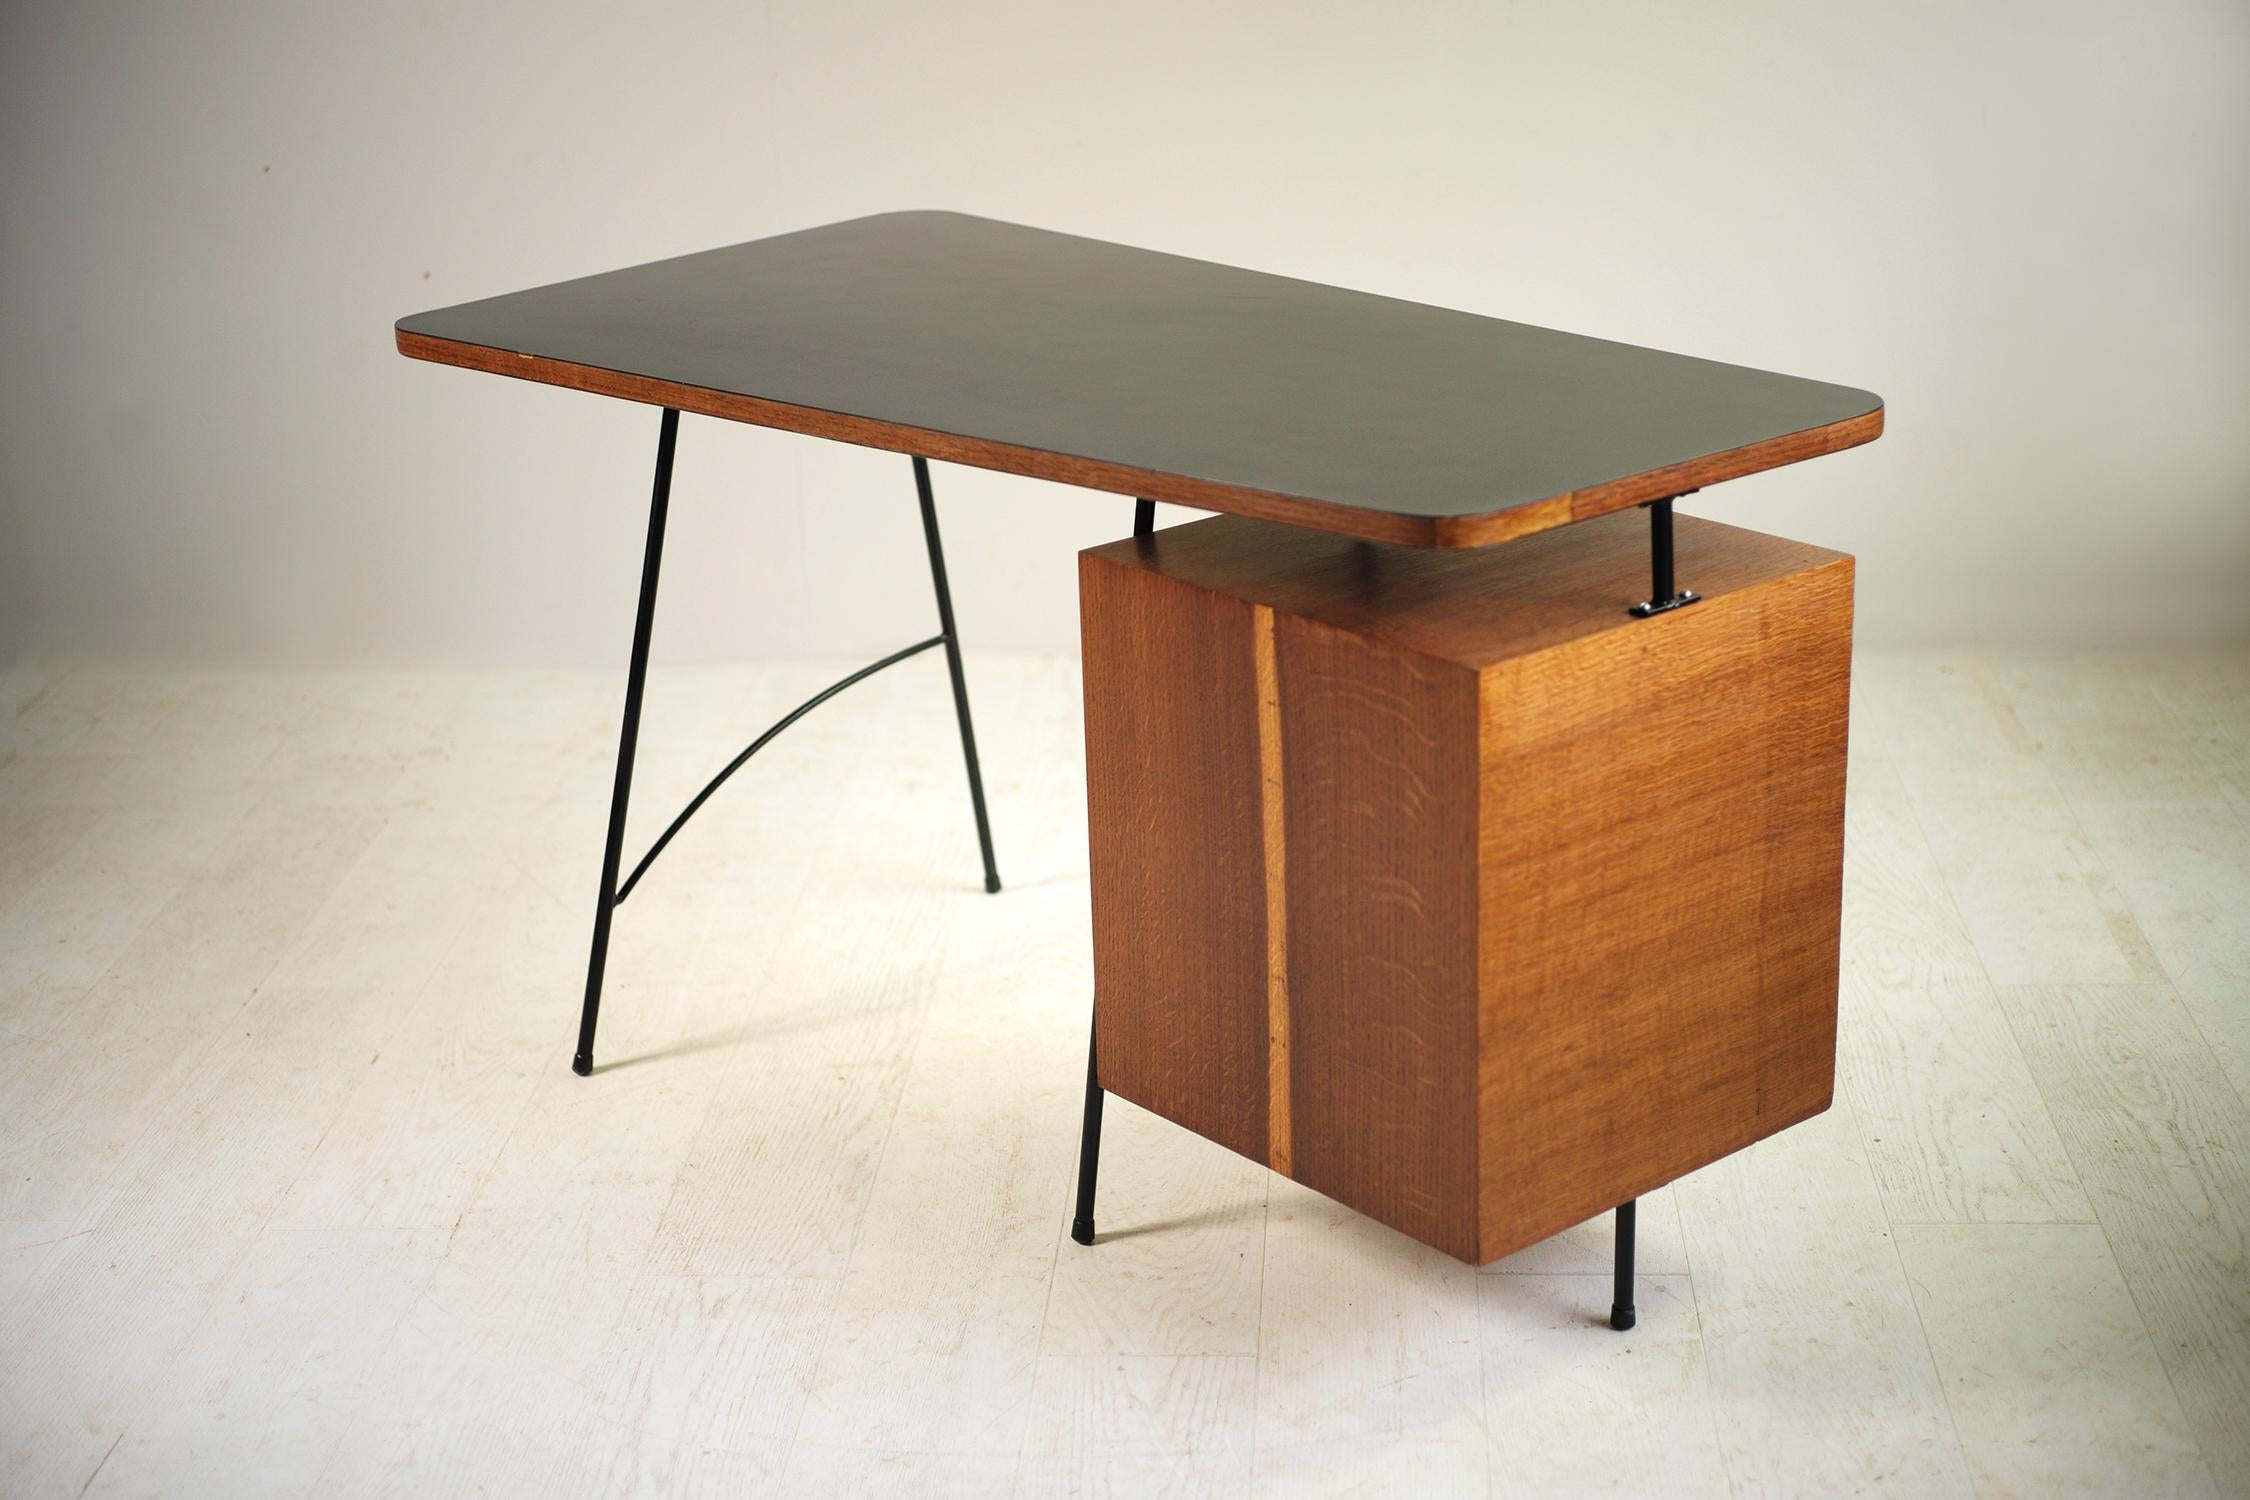 Georges Frydman, desk in oak, Formica and tubular metal, edited by EFA, France, 1956. The asymmetrical top is dressed in a black Formica on the upper side, a shaded white Formica on the underside. The box has three drawers, one of which has a